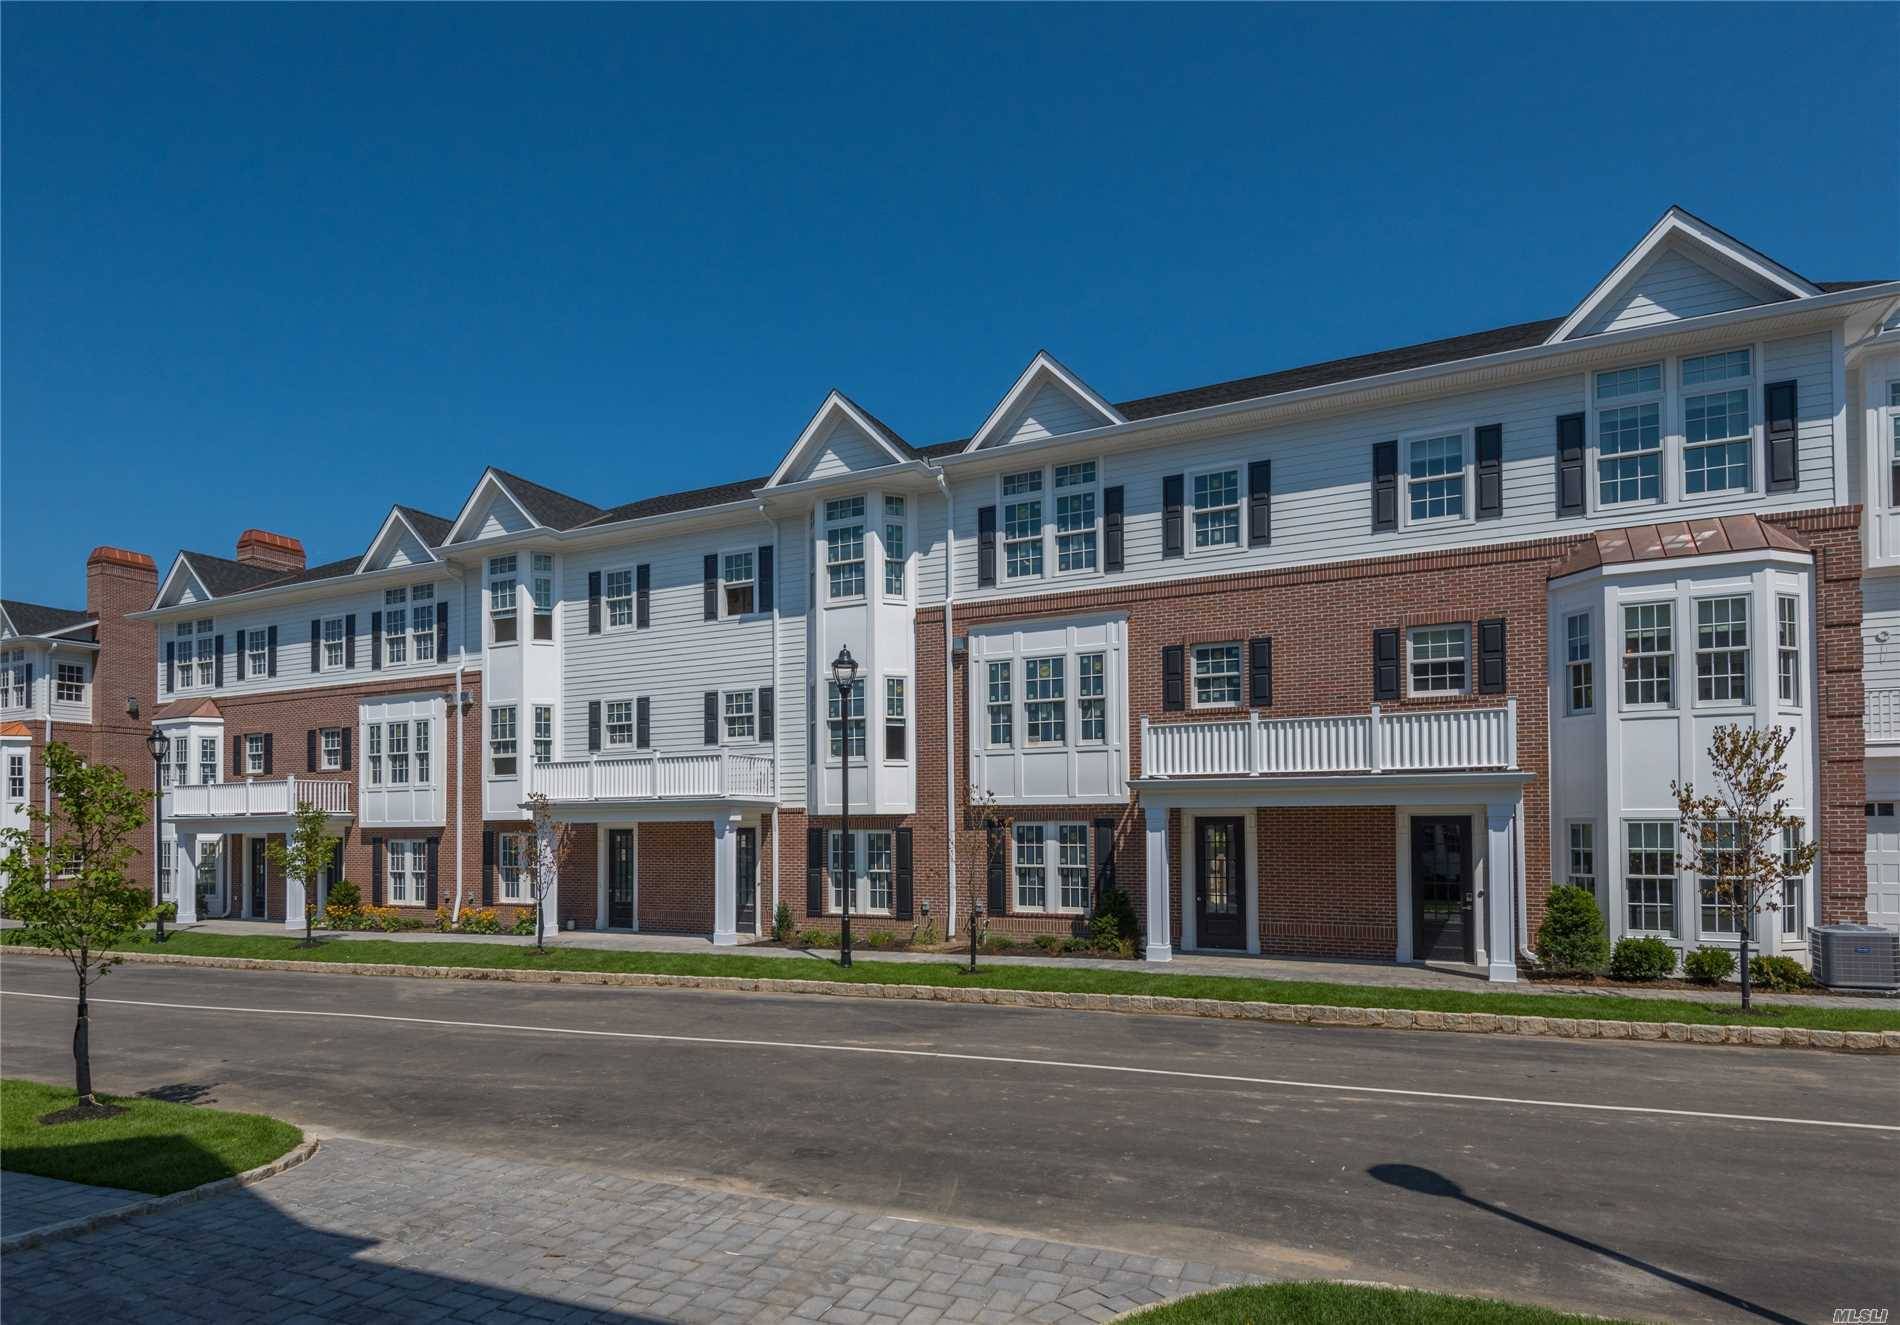 Luxury New Townhomes In The Heart Of Roslyn Village.